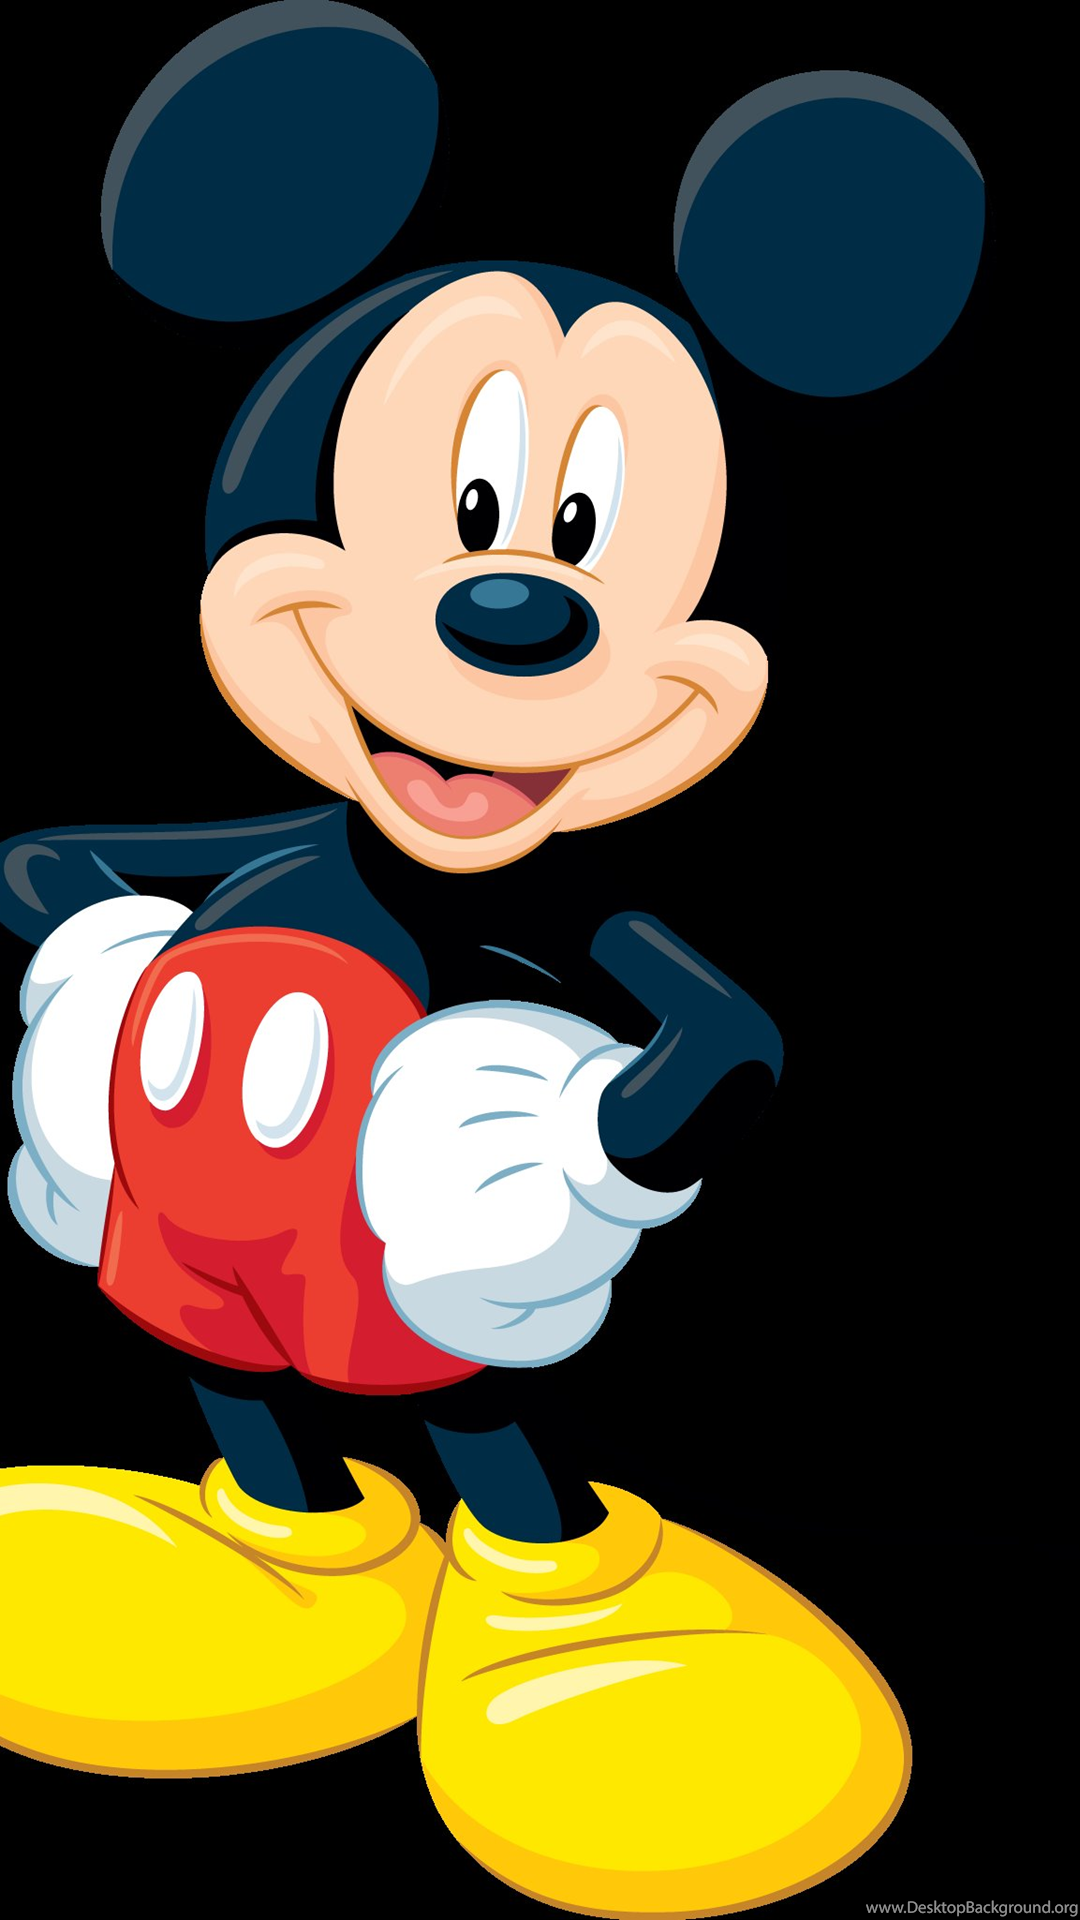 Mickey Mouse Wallpapers For Ipad Air 2 Cartoons Wallpapers - Cartoon Wallpaper Hd For Mobile , HD Wallpaper & Backgrounds